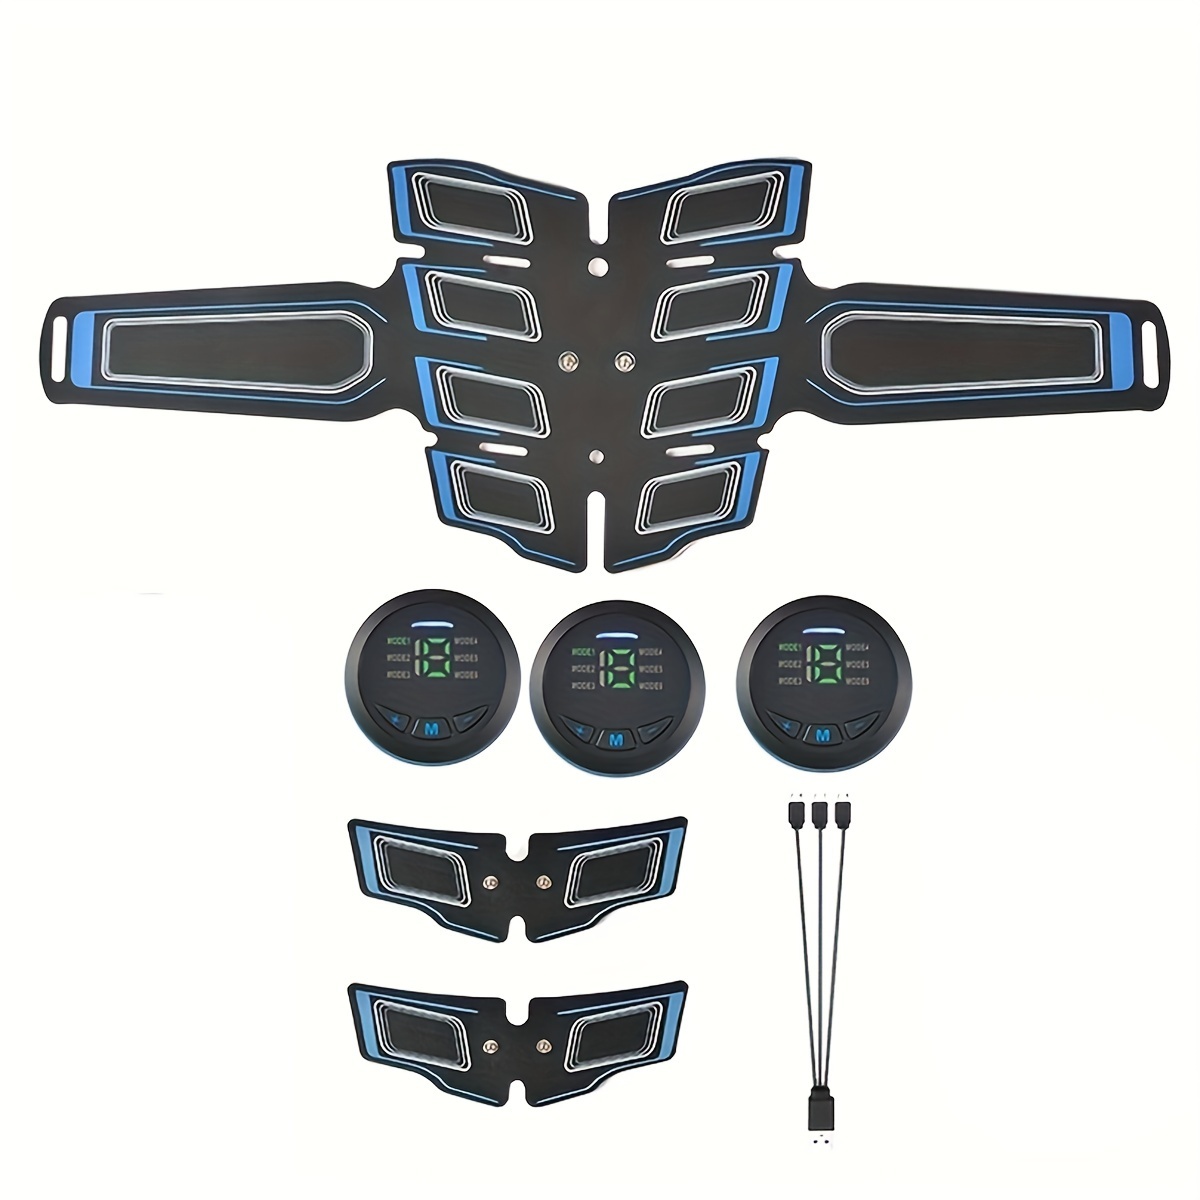 EMS ABS Stimulator Abdominal Massager For Abdominal Toning And Fitness  Abdos Abroadinal Trainer Belt For Arm And Leg Workout 230x From Omqhcg,  $21.41